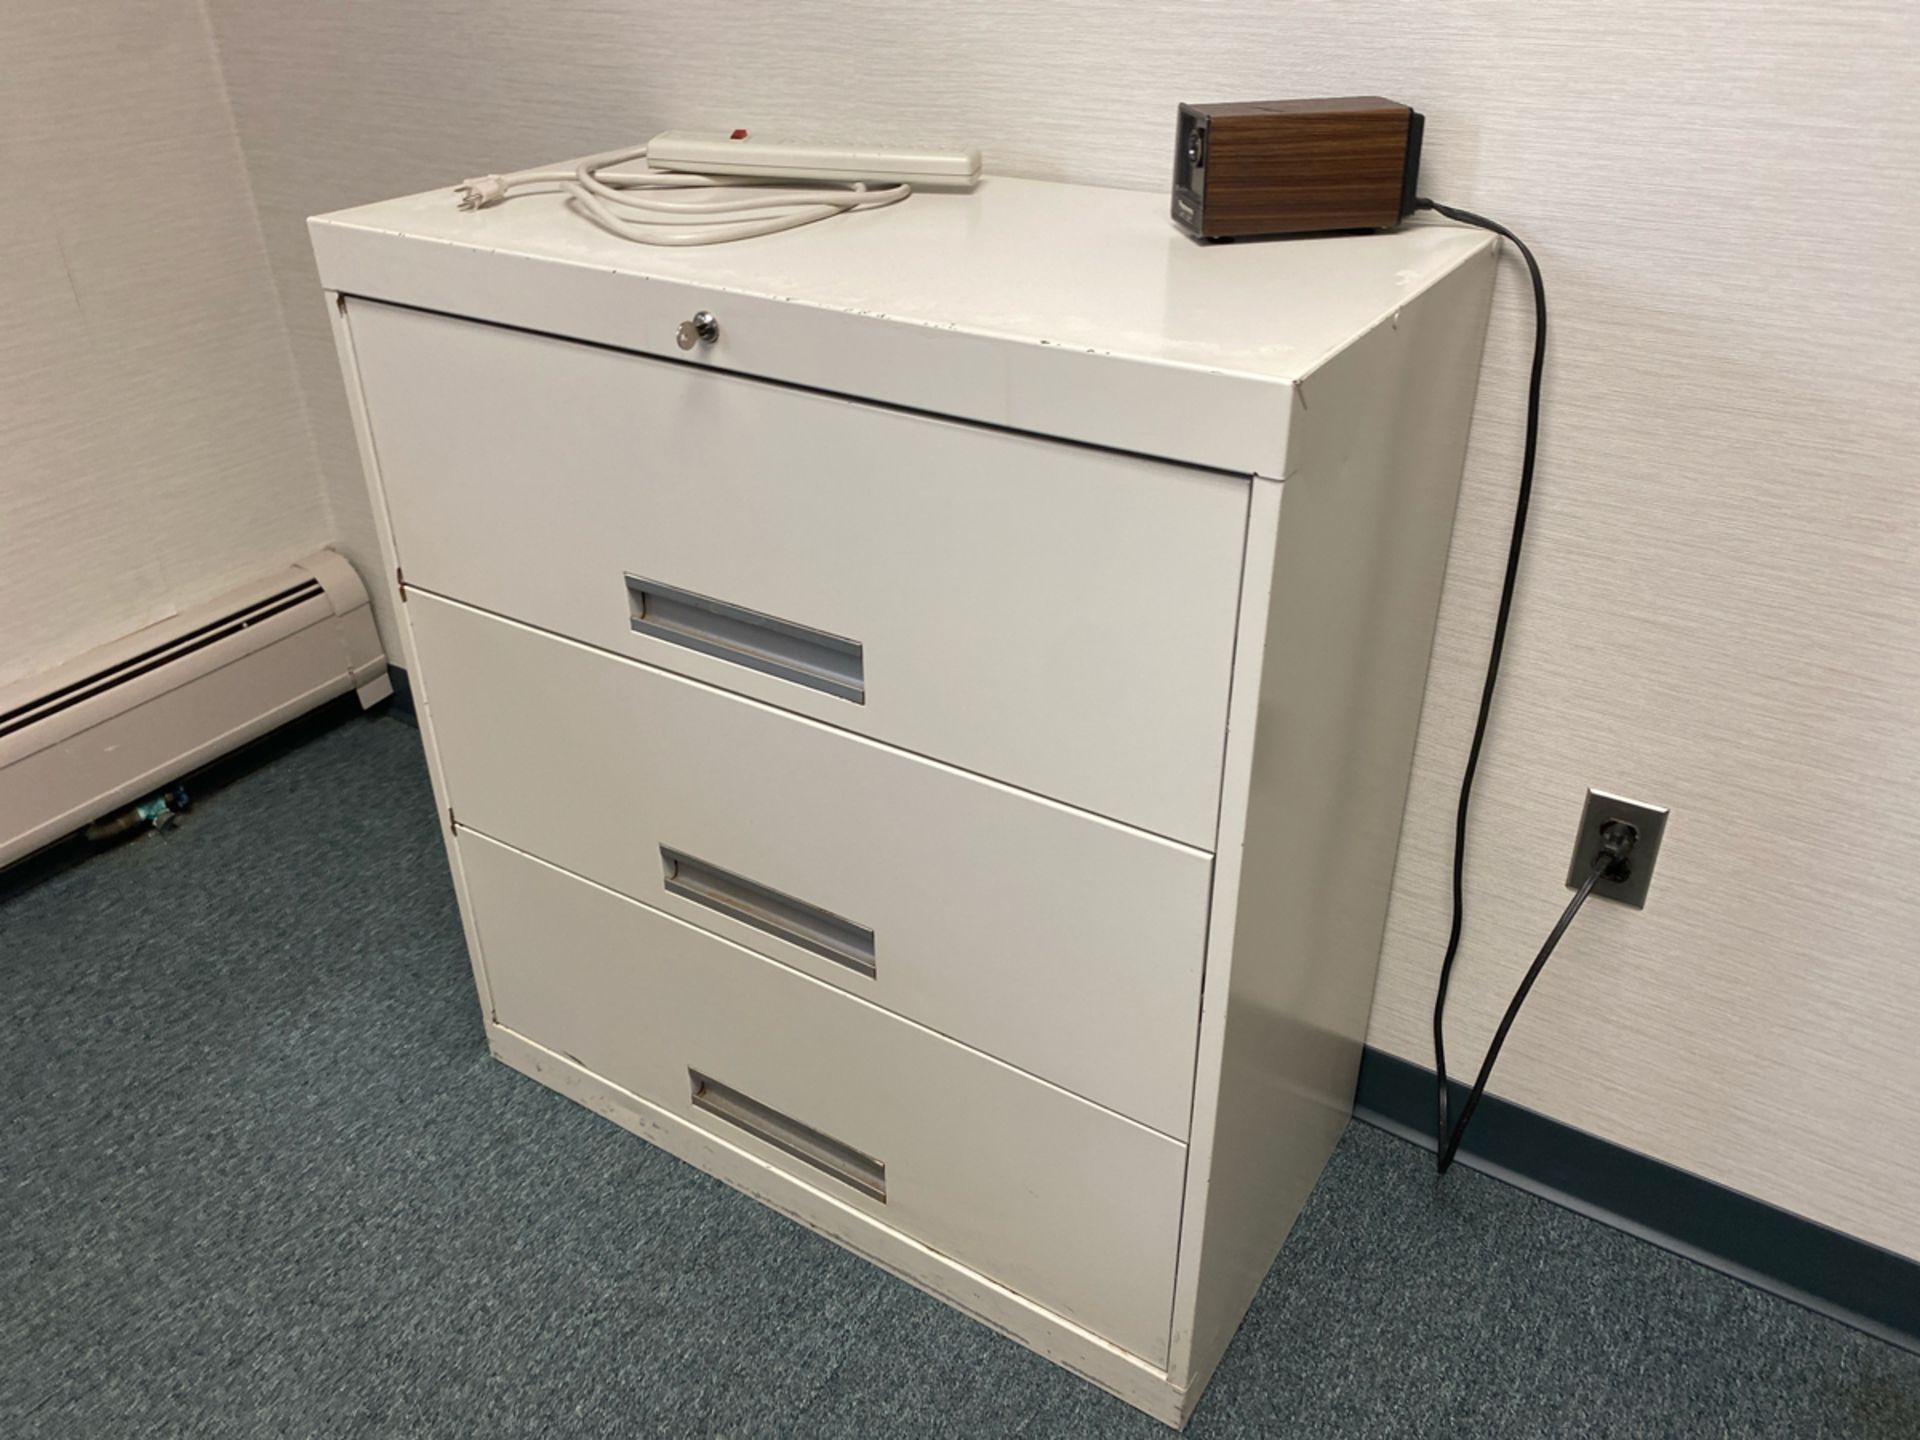 A Group of Office Furniture Throughout Rooms - Image 10 of 10